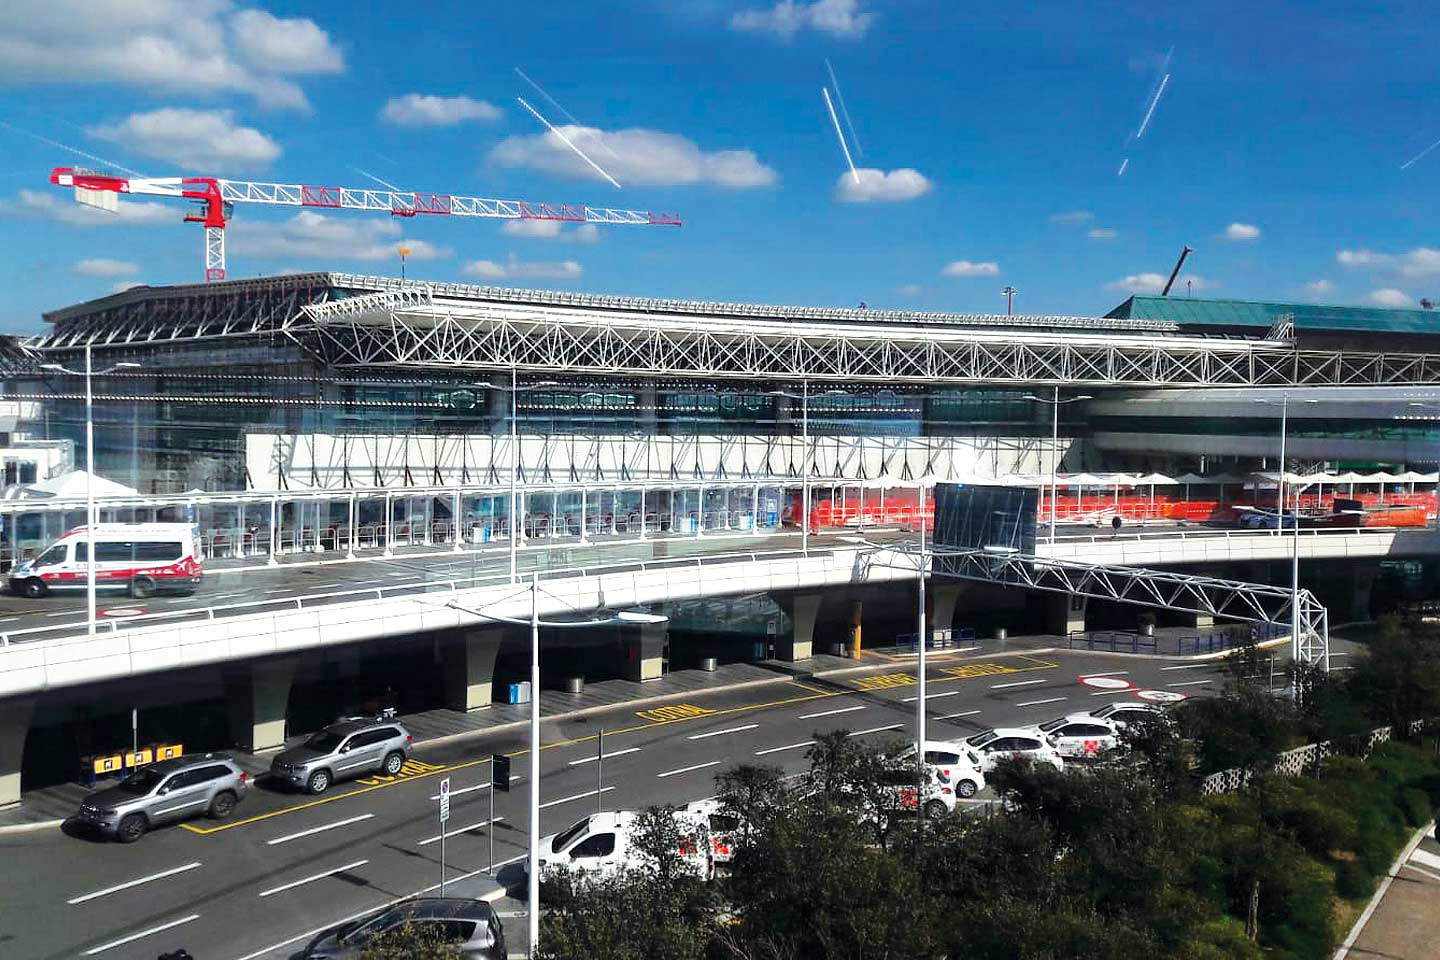 New Terminal T1 extension for the Fiumicino Airport